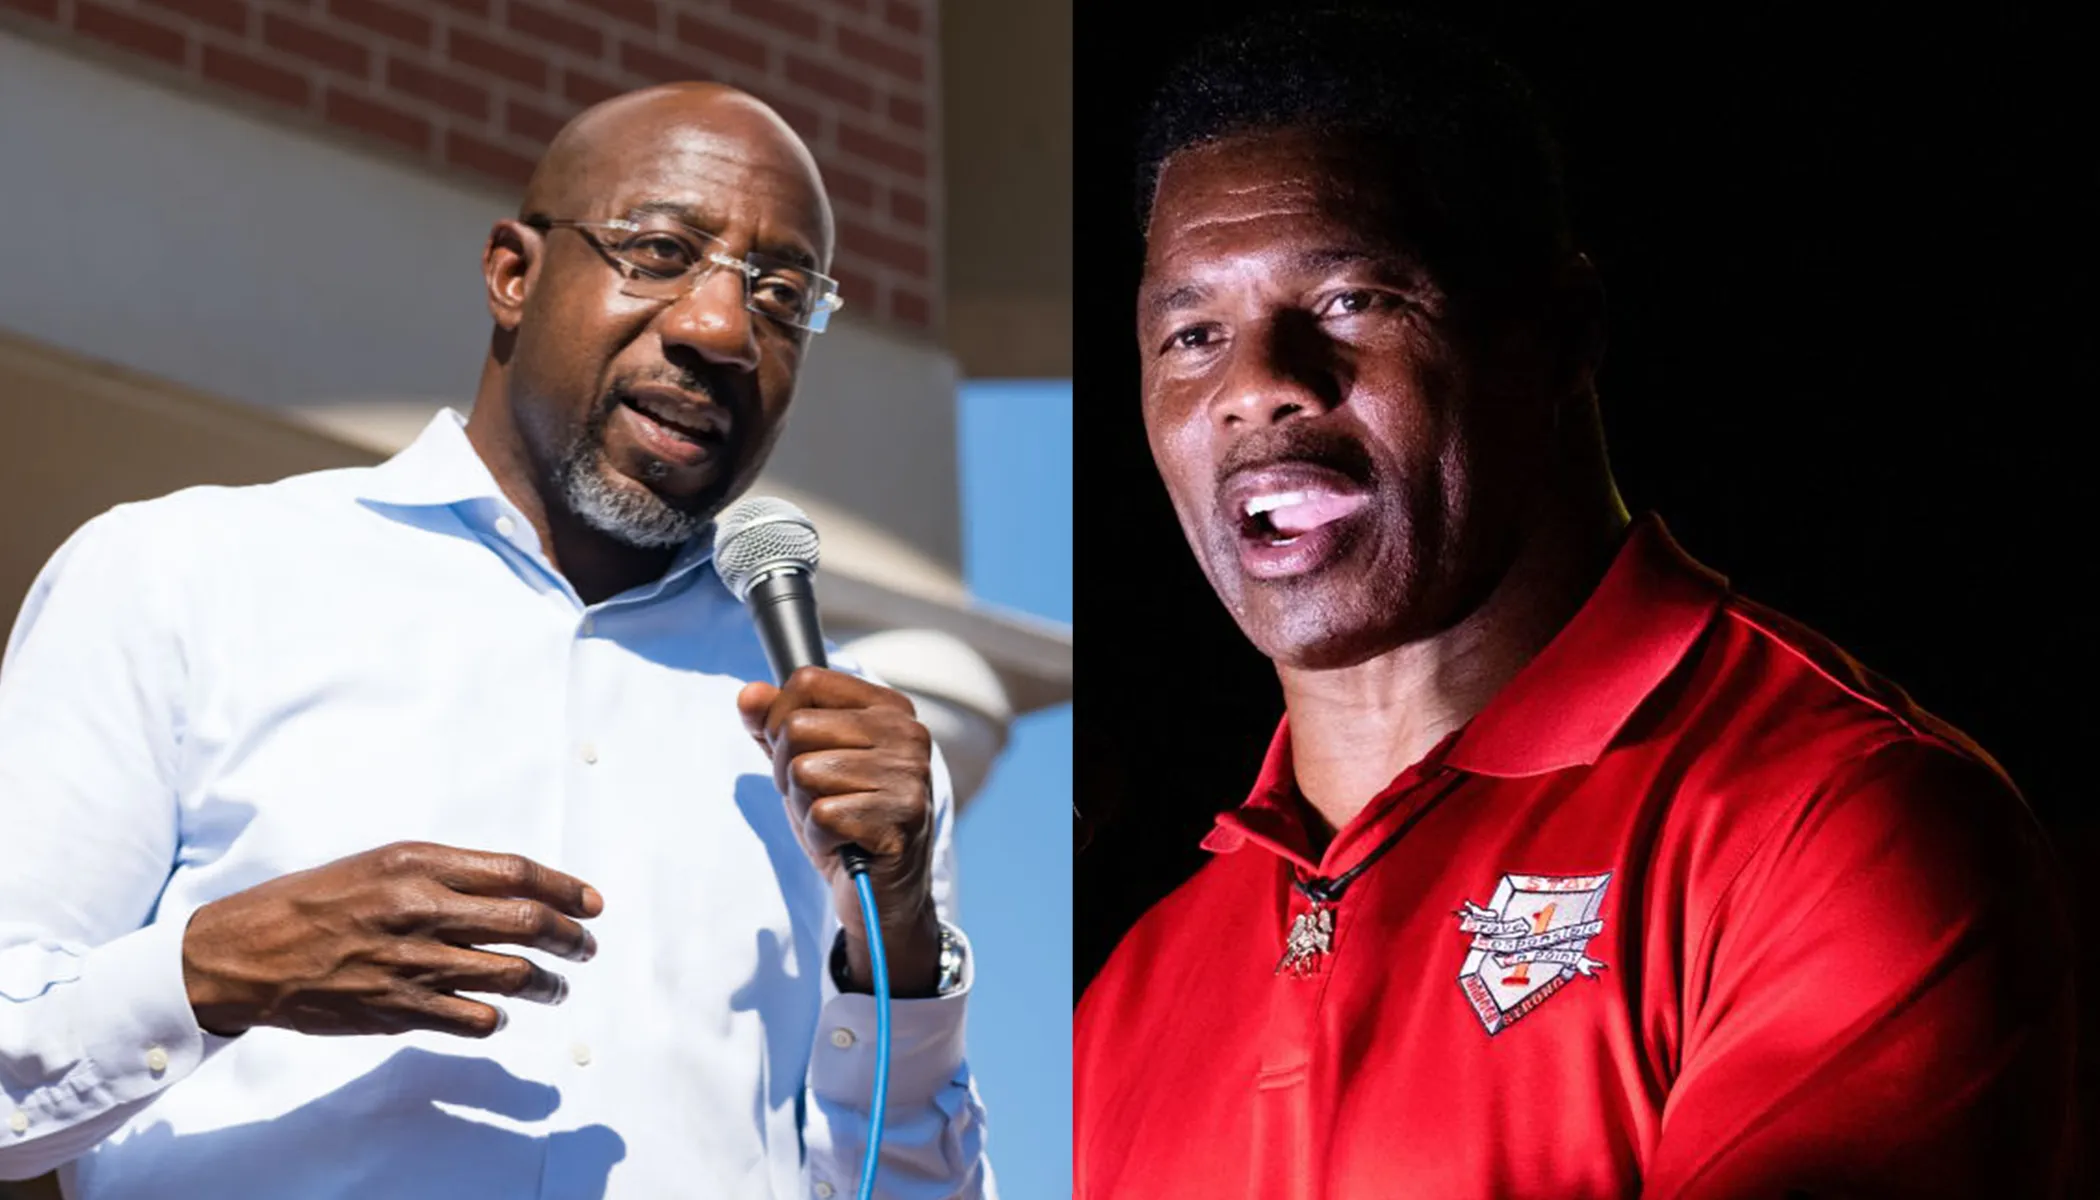 Sen. Raphael Warnock, D-Georgia, (left) speaks at a campaign event on Election Day, Nov. 8, 2022. 
Republican U.S. Senate candidate Herschel Walker (right) speaks to supporters in Kennesaw, Georgia, Nov. 7, 2022. The two squared off in a tight race Tuesday, Nov. 8, 2022. If neither candidate receives 50% plus one vote needed, they will head to a runoff in December.?w=200&h=150